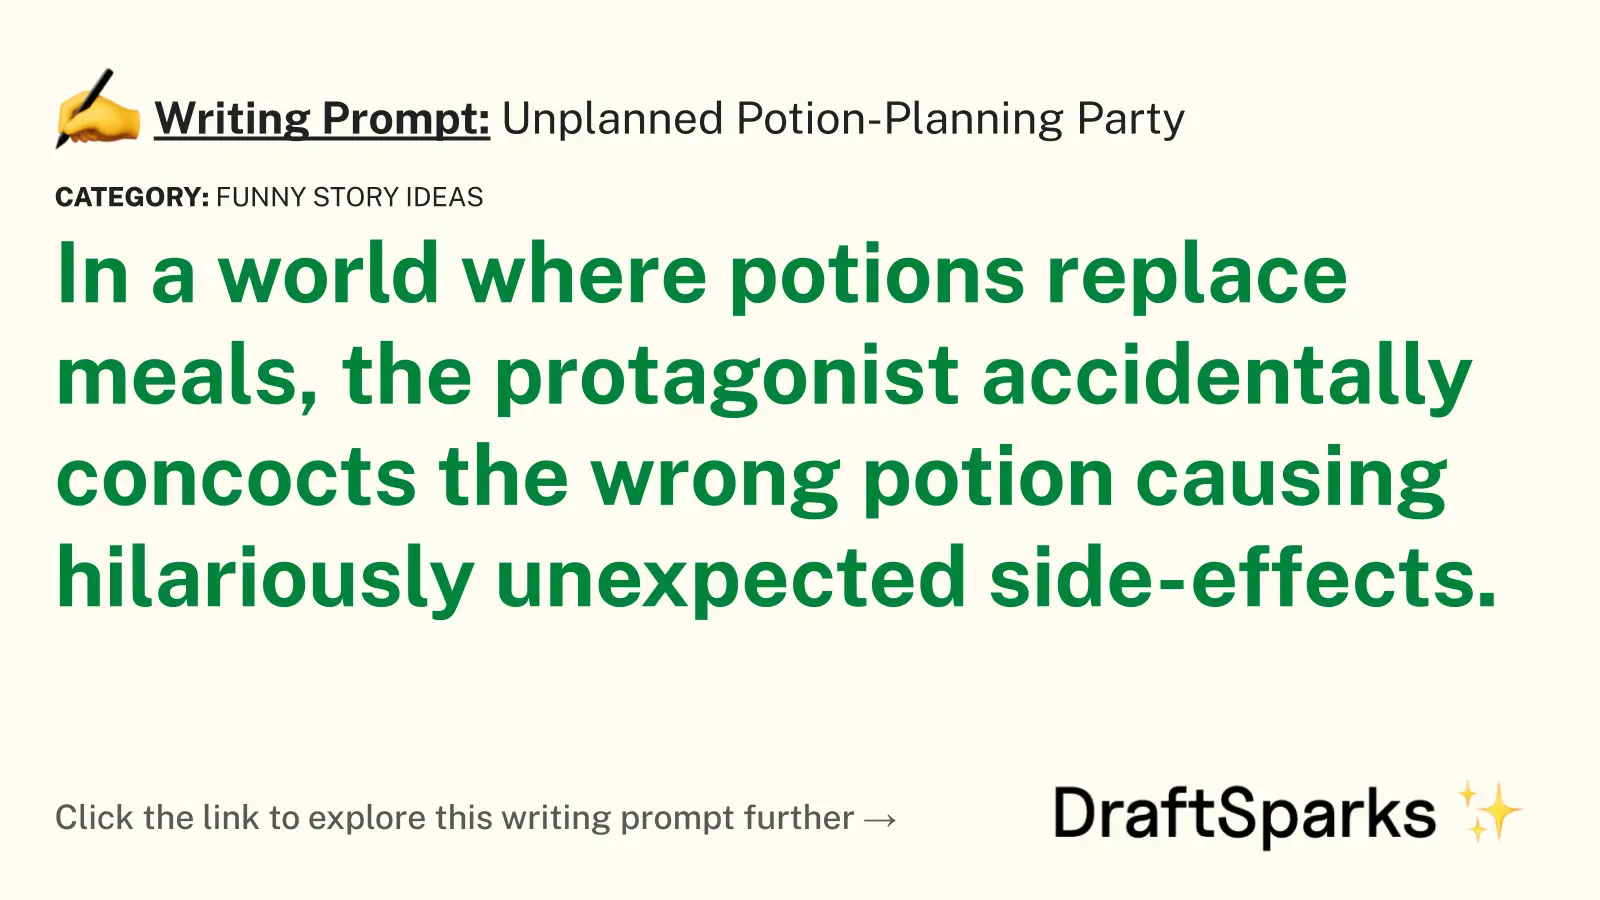 Unplanned Potion-Planning Party